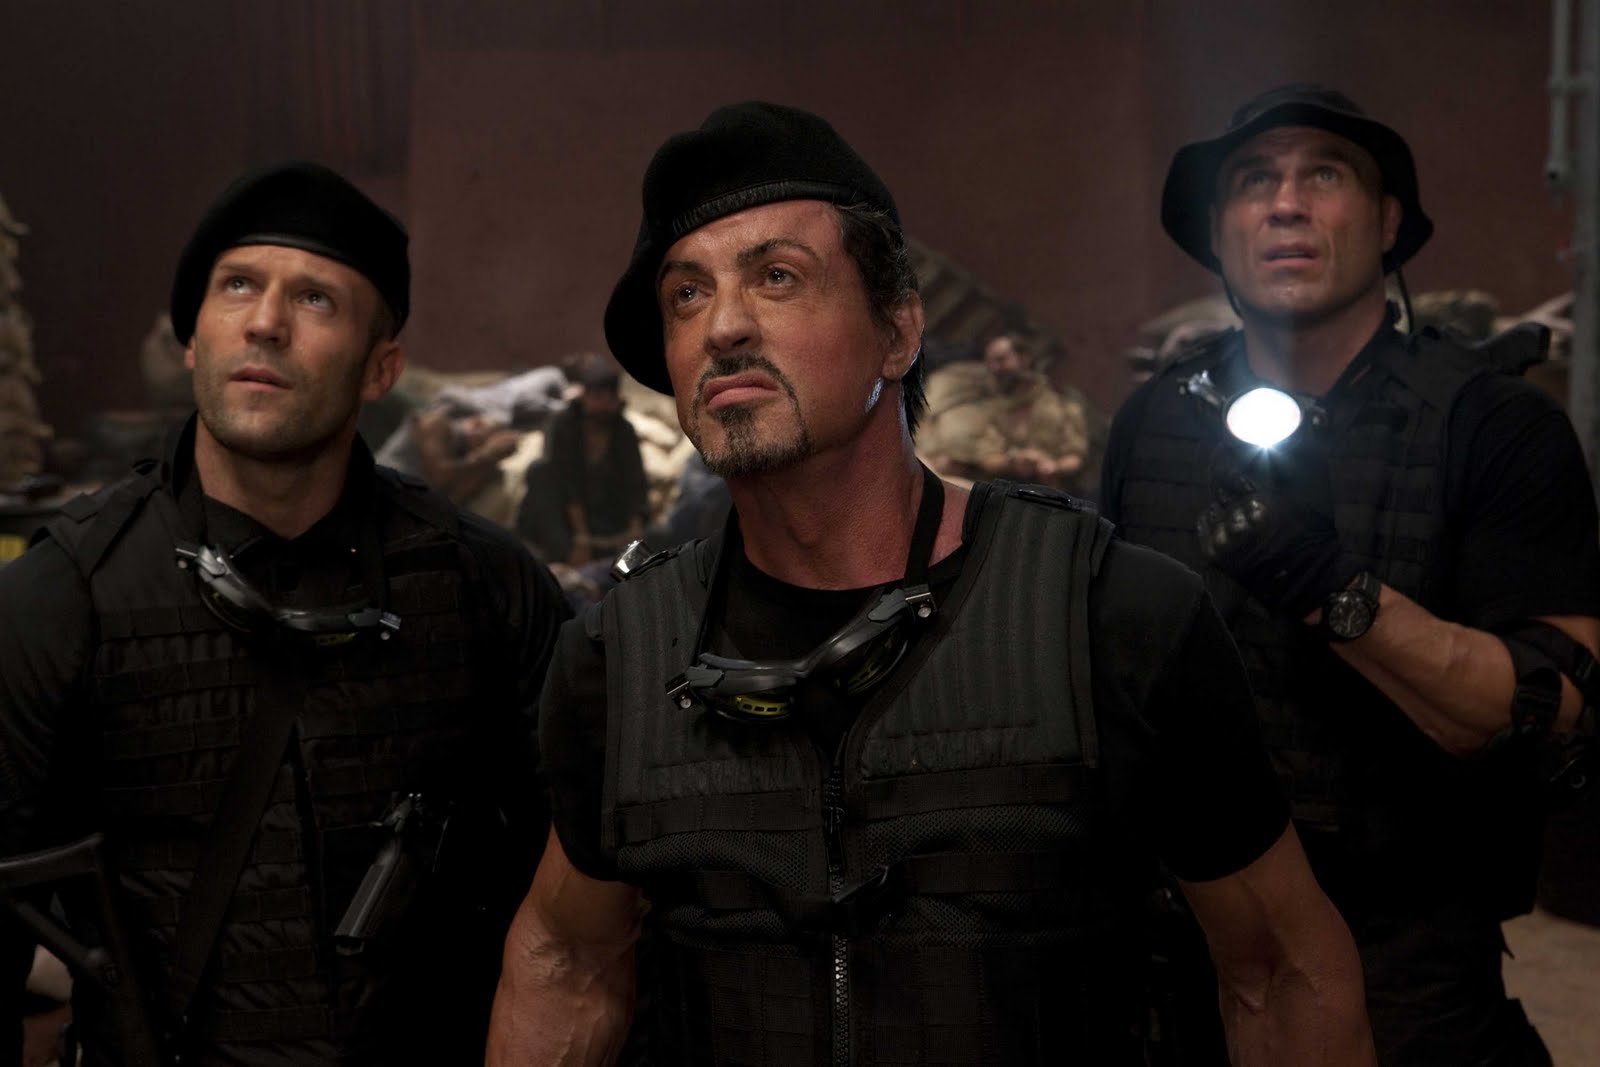 The Expendables | Teaser Trailer1600 x 1067